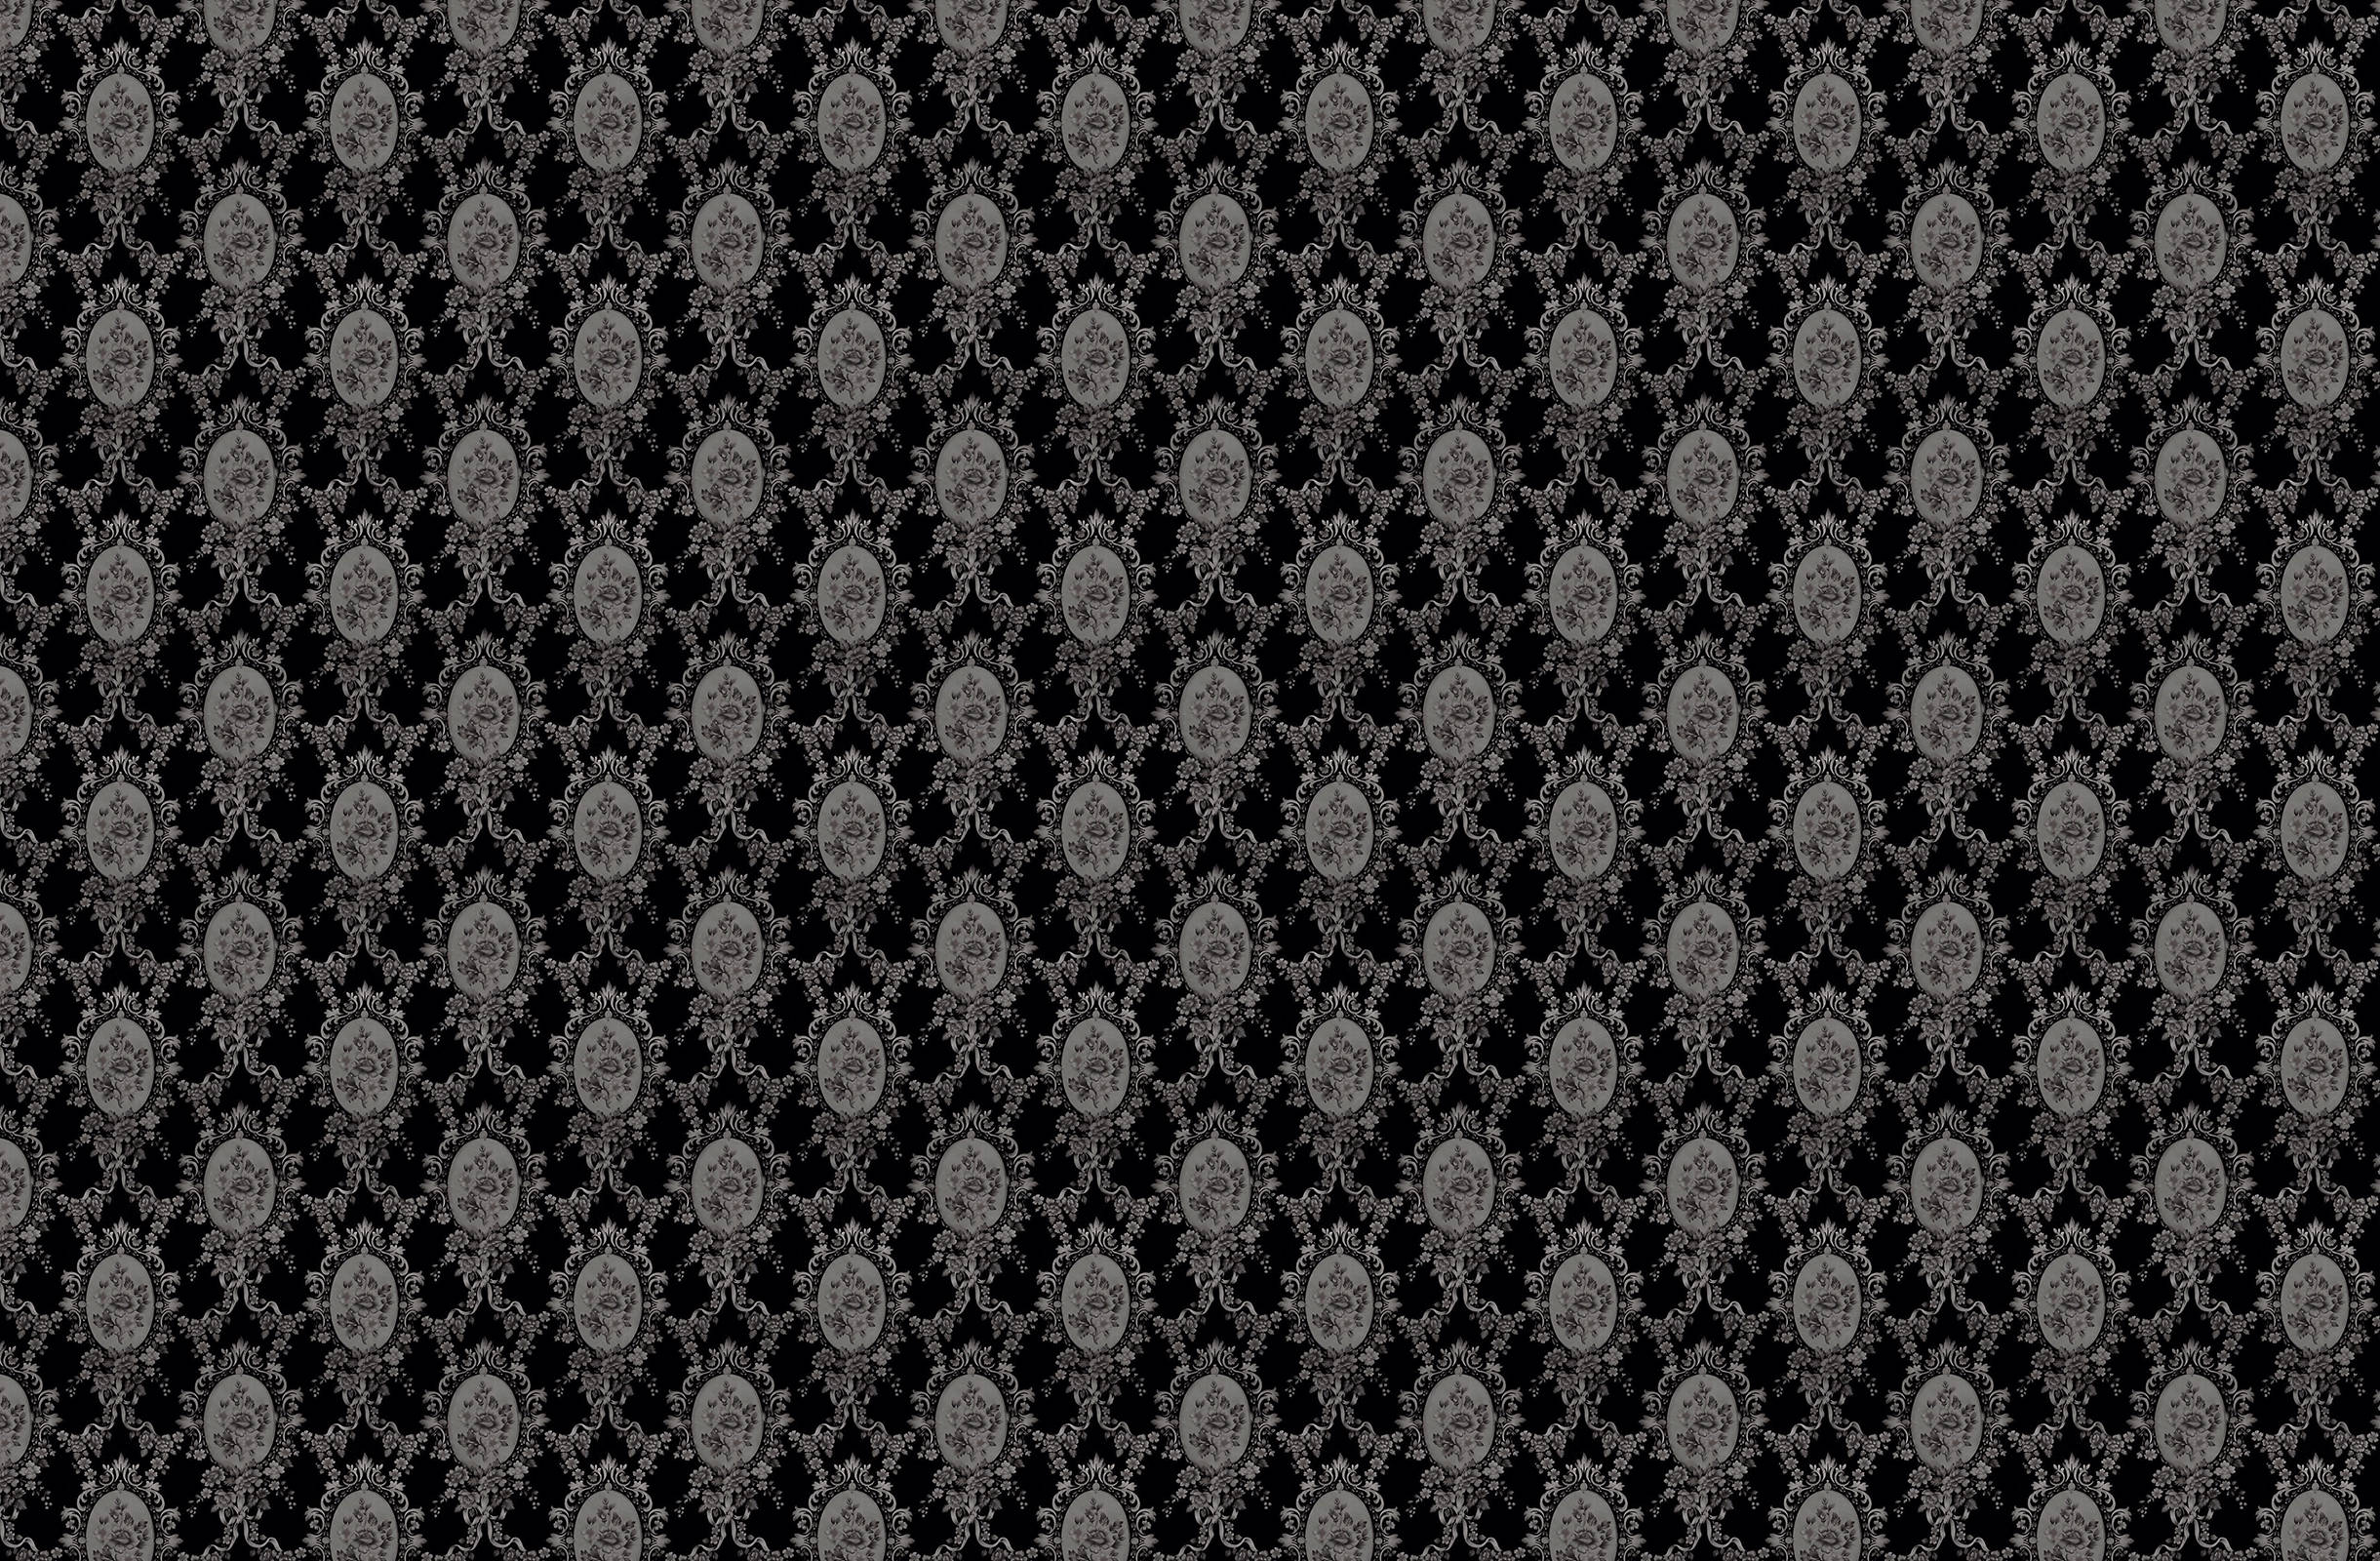 Aesthetic Victorian Gothic Pattern Background